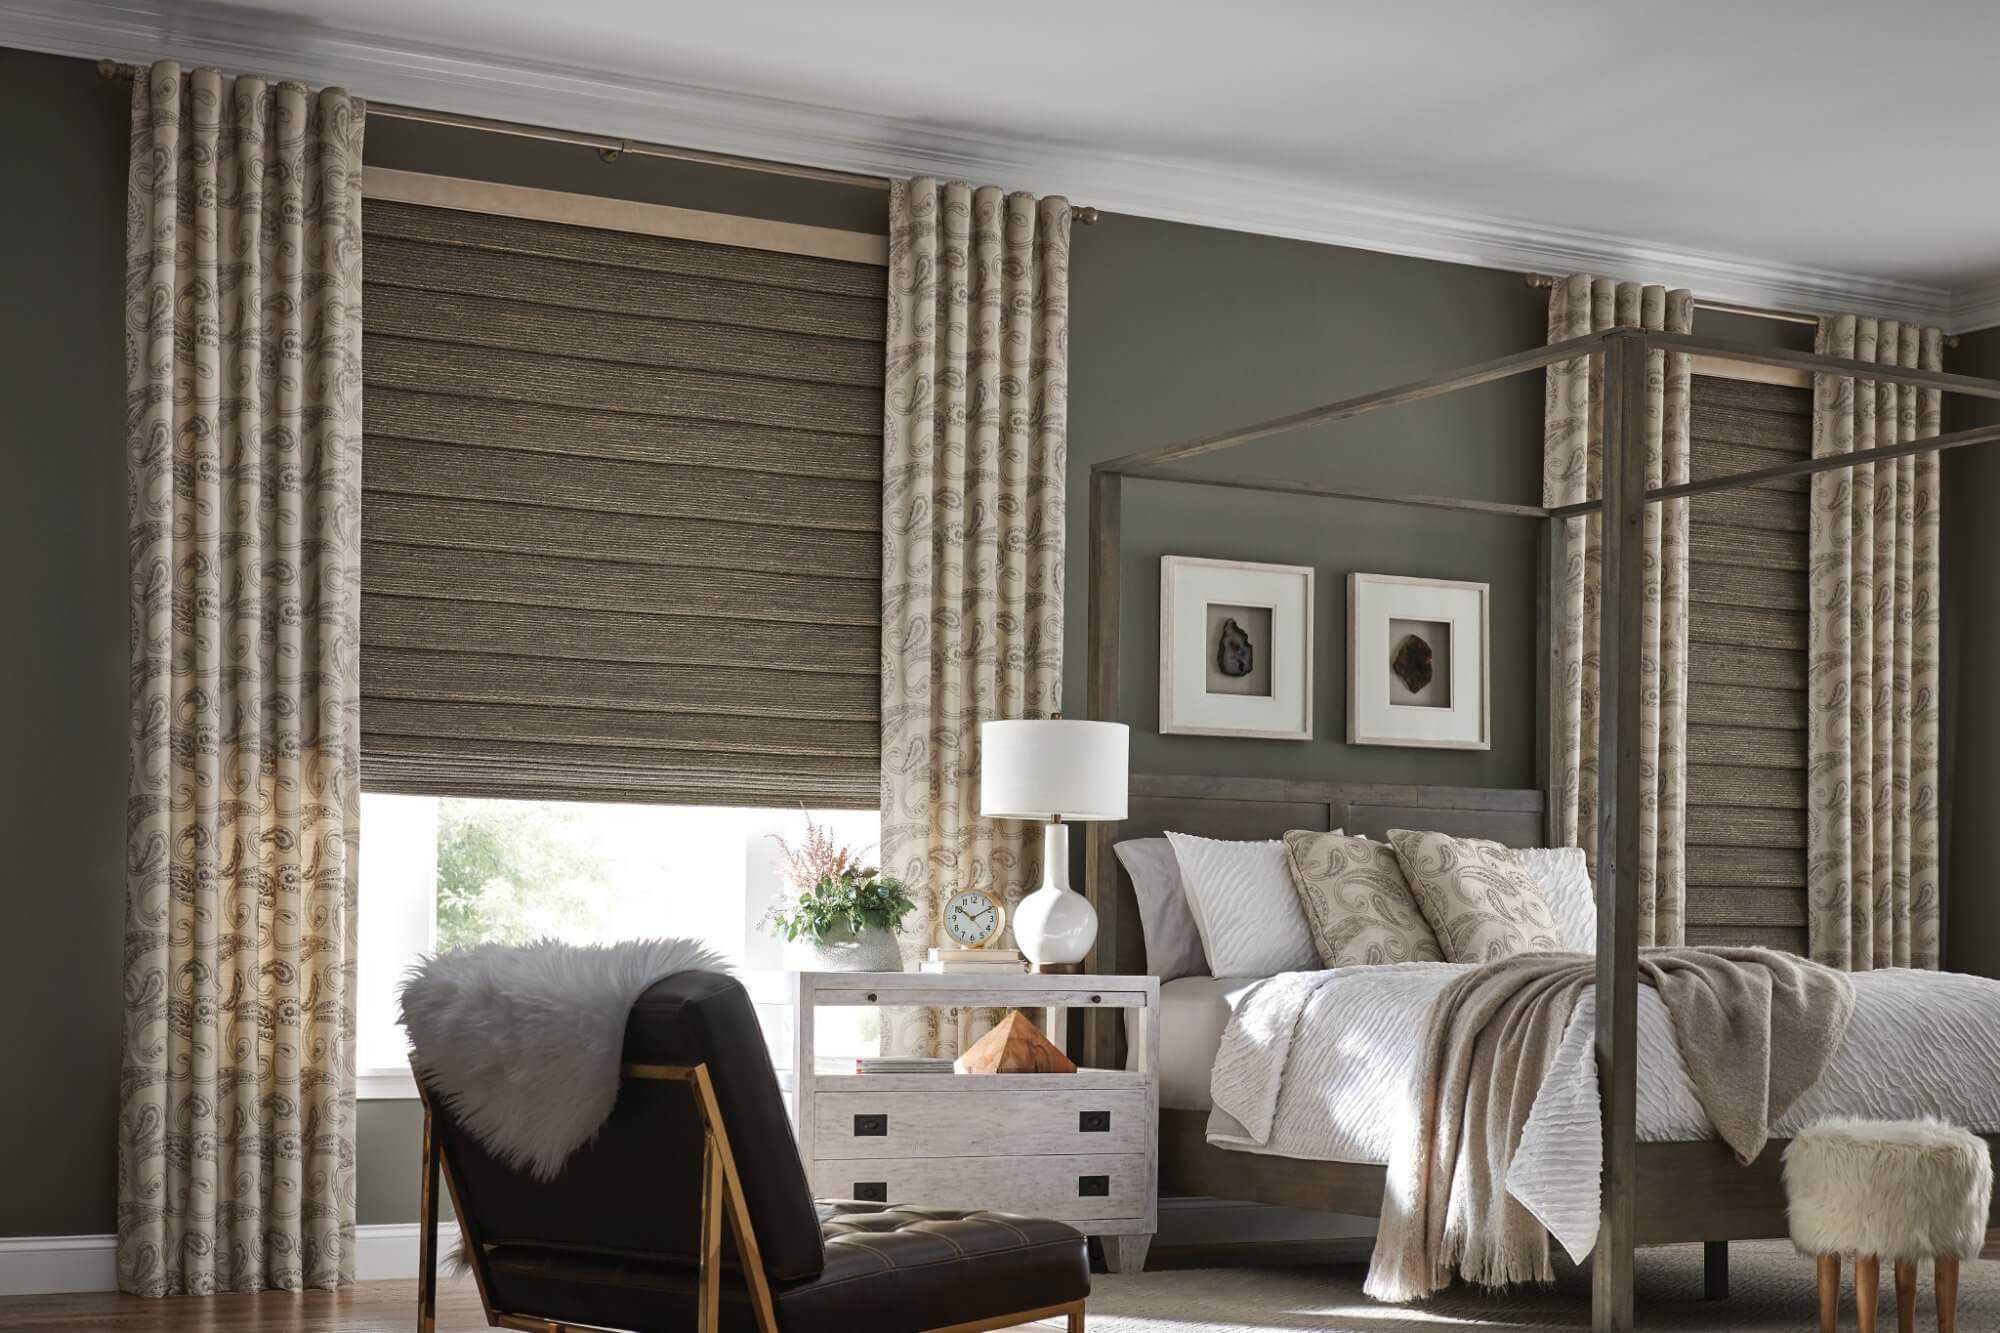 Draperies and curtains can be added on top of other window treatments adding another design element to the room as well another layer of insulation.